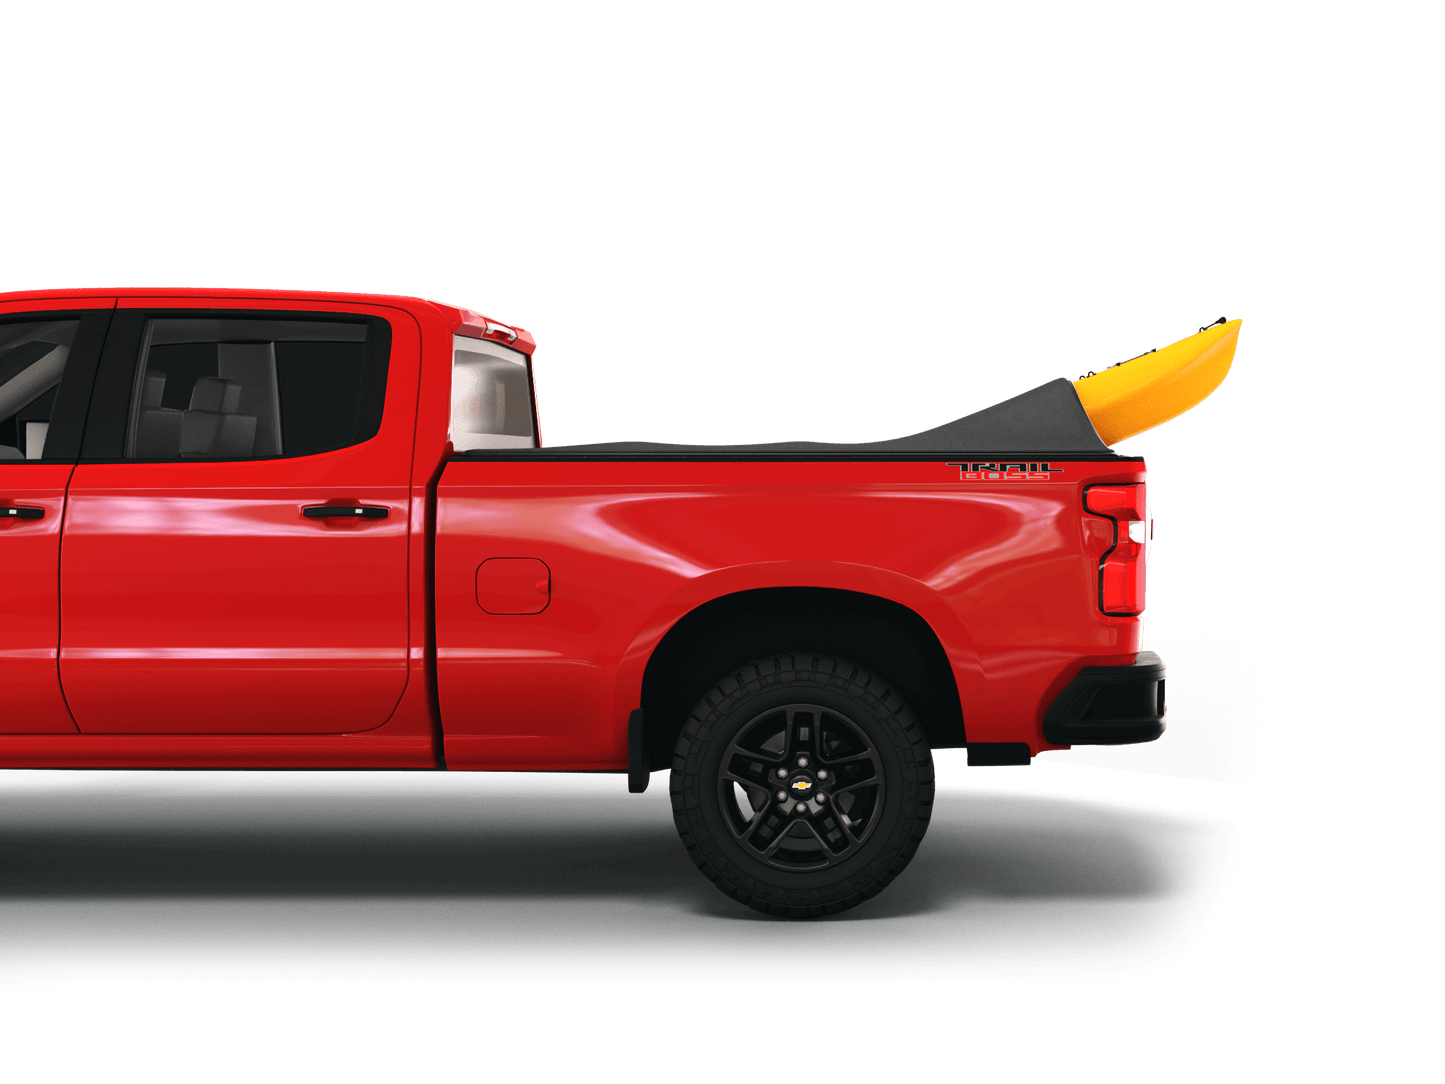 Red Chevrolet Silverado 2500HD / 3500 HD / GMC Sierra 2500HD / 3500HD with yellow kayak under sawtooth stretch truck bed cover